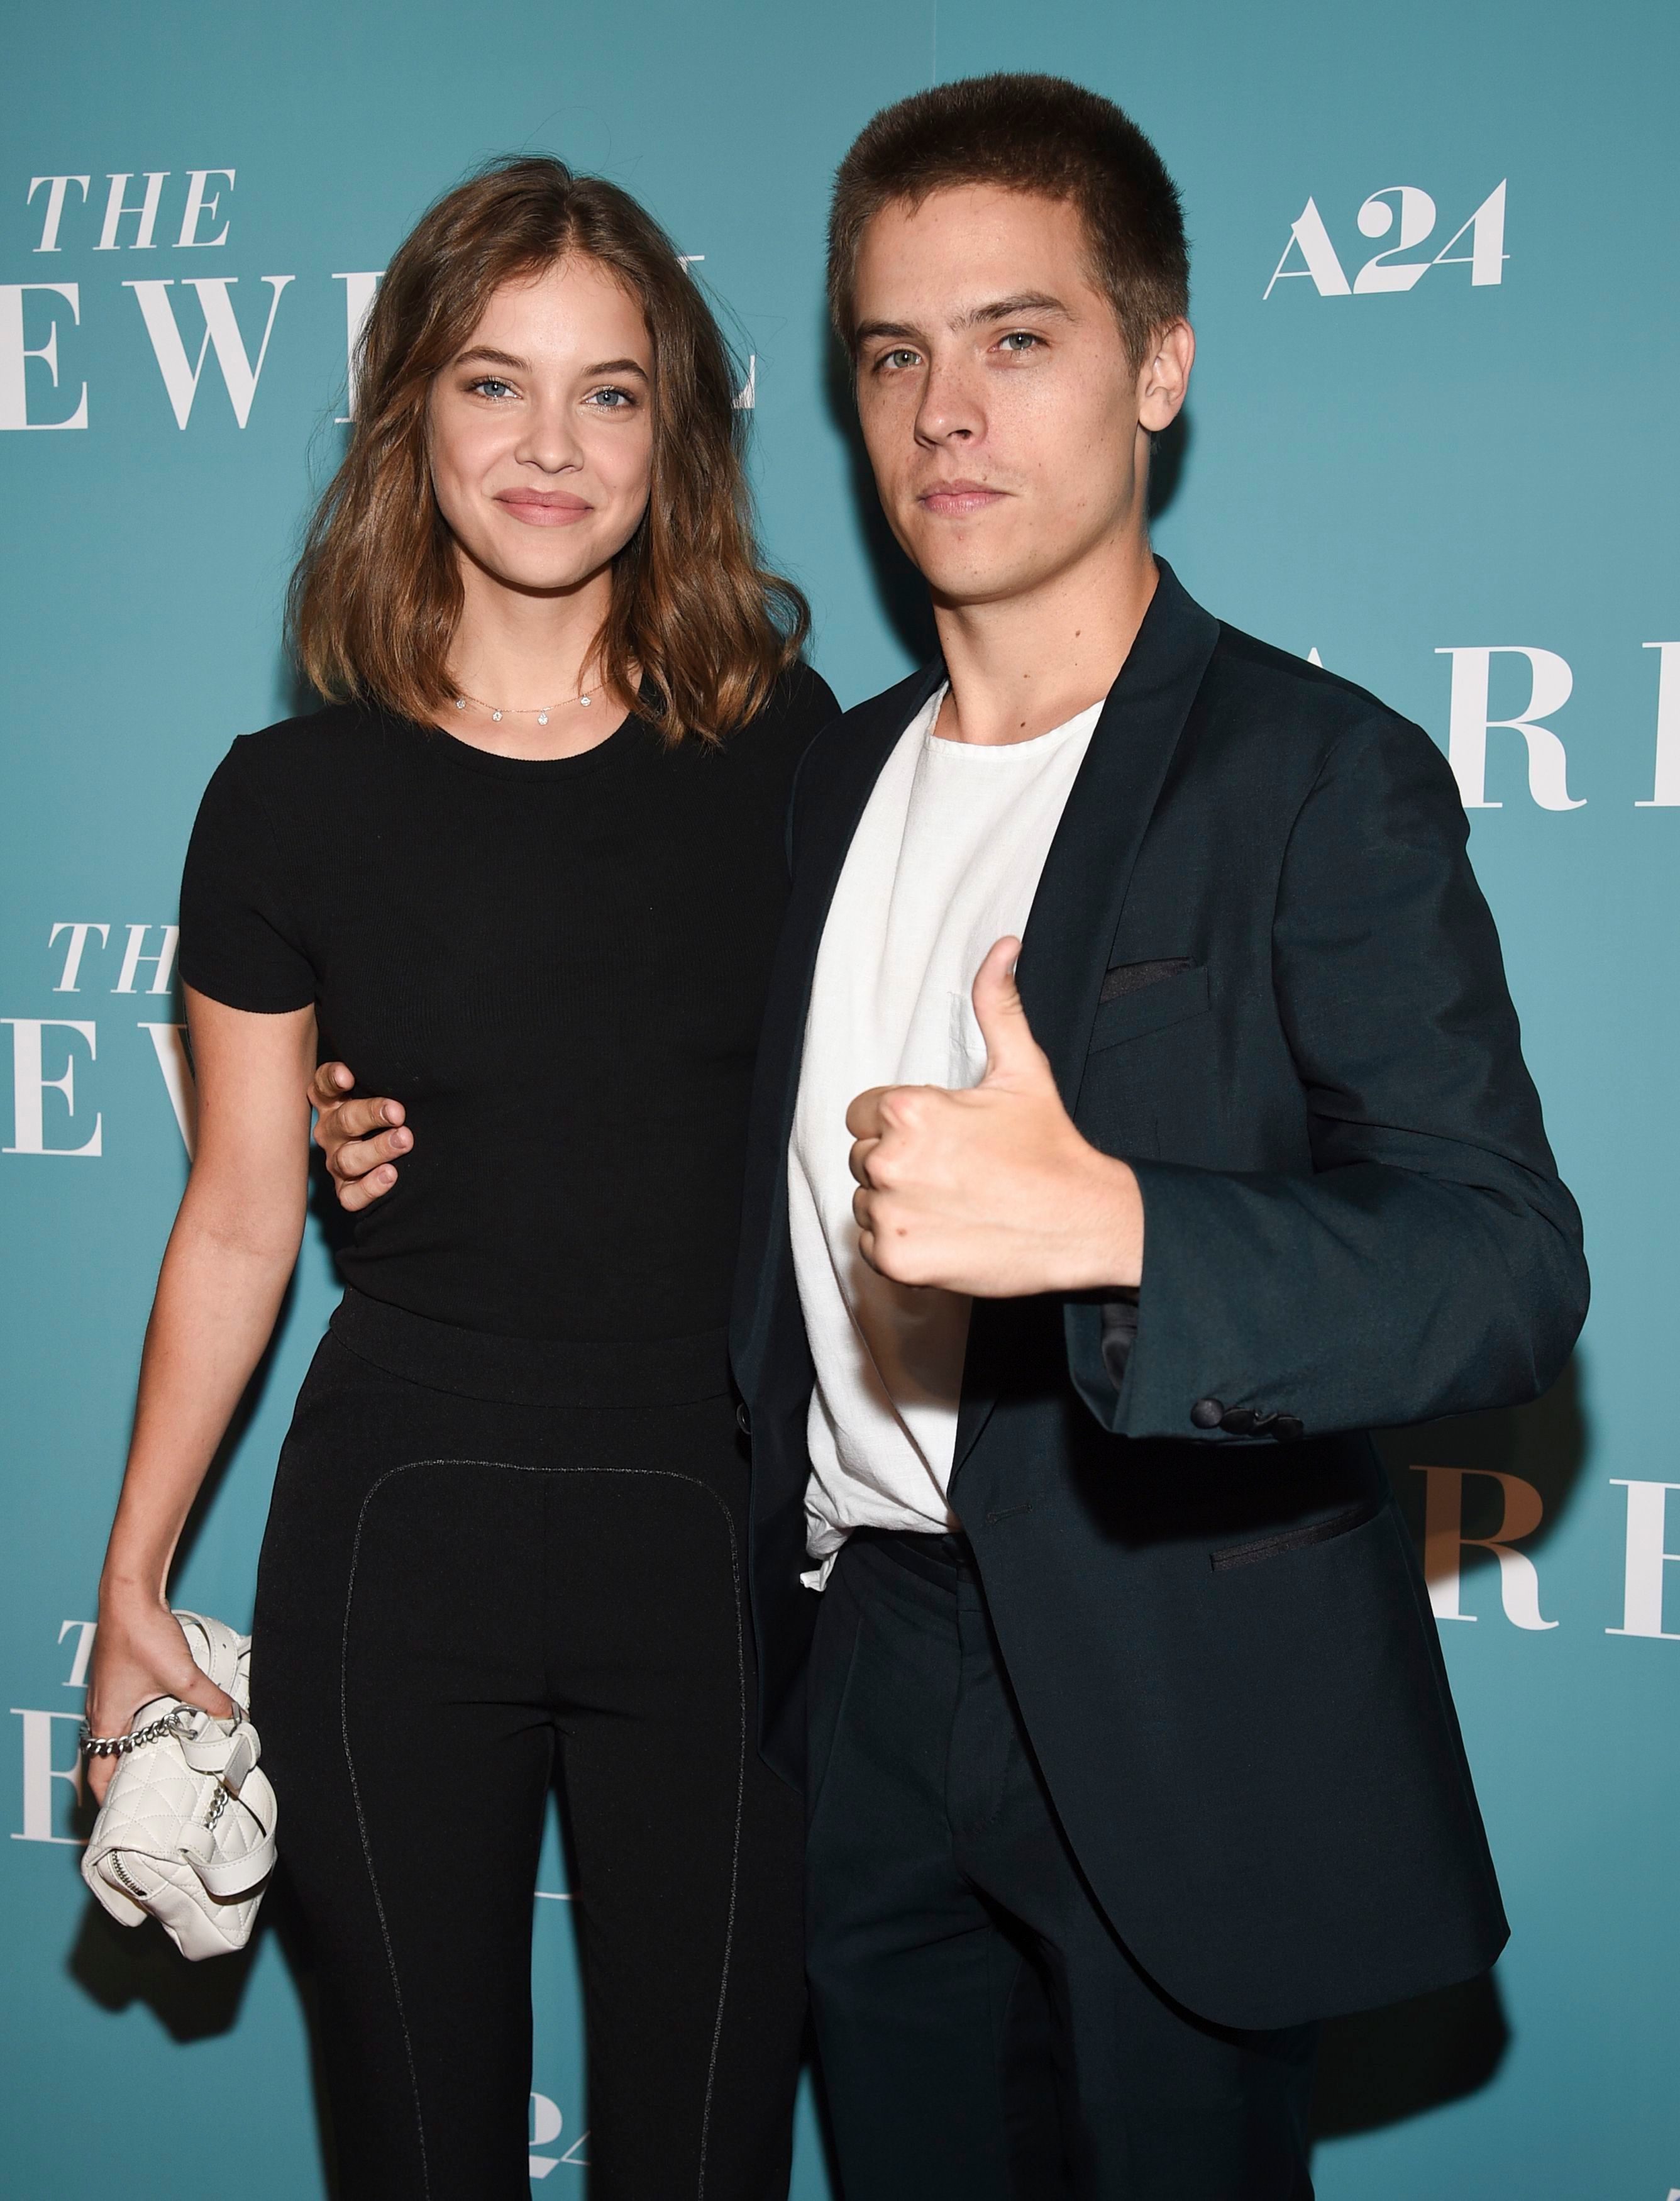 <p>During an interview with <a href="https://www.wmagazine.com/story/dylan-sprouse-barbara-palvin-dating-interview">W magazine</a> that debuted online in February 2019, Dylan Sprouse and Barbara Palvin dished on how they met and <a href="https://www.wonderwall.com/celebrity/couples/biggest-celebrity-love-life-stories-july-2018-hollywood-romance-report-3015523.gallery?photoId=1032844">fell in love</a>: "He slid into my DMs," said the Victoria's Secret model. "She followed me, so I was like, 'I guess I'll give her something.' And I slid into her DMs," chimed in the <a href="https://www.wonderwall.com/celebrity/dylan-and-cole-sprouses-transformation-from-child-stars-to-power-players-369275.gallery">former child star</a>. "I was like, 'Hey, I don't know if you're in New York for very long, but we should hang out if you want to. Here's my number.' And she didn't message me for six months." Explained Barbara, "I took my time. I knew I wasn't in a good mindset at the time, and maybe deep inside I knew that it could be something more." Added Dylan, "I'm not one to chase. If I get left on read after putting out my number, f*** that. I'm crying internally, but outwardly… So I ended up booking a movie and going to China for a six-month shoot. My manager was with me and asked, 'Dylan, is there anything you wish you had wrapped up before you left?' ... And for the first time in six months, Barbara popped in my head, and I thought, I wish I had time to take this girl on a date. Ten minutes later, Barbara texts me for the first time in six months." She then joined him in China, where she was supposed to have a gig -- even though it got canceled.</p>